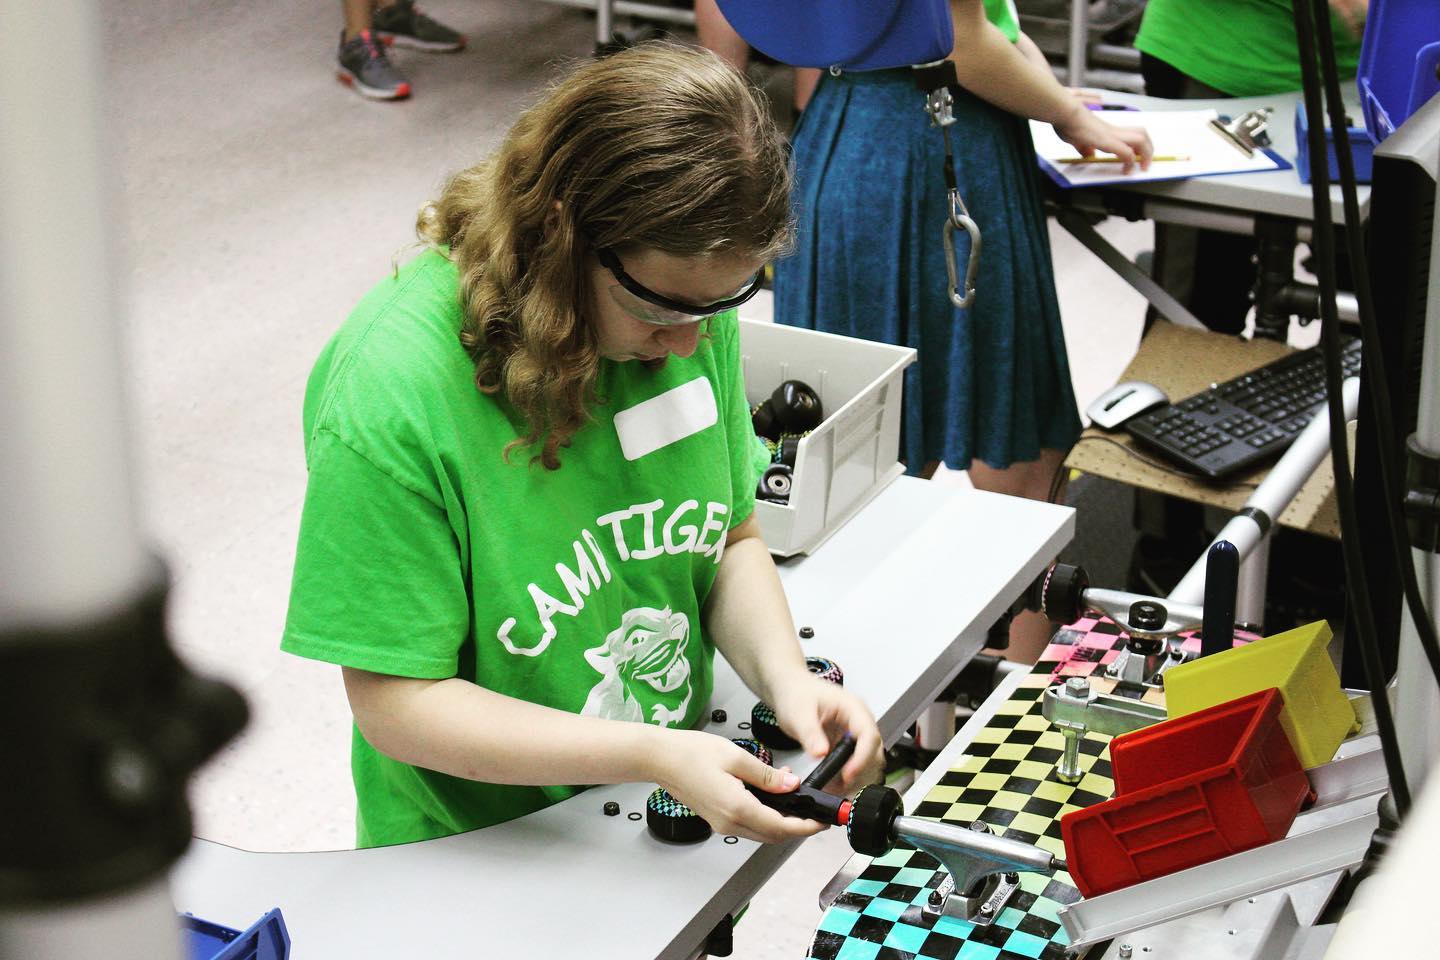 Camp Tiger camper working on an assembly line putting a skateboard together with other campers.